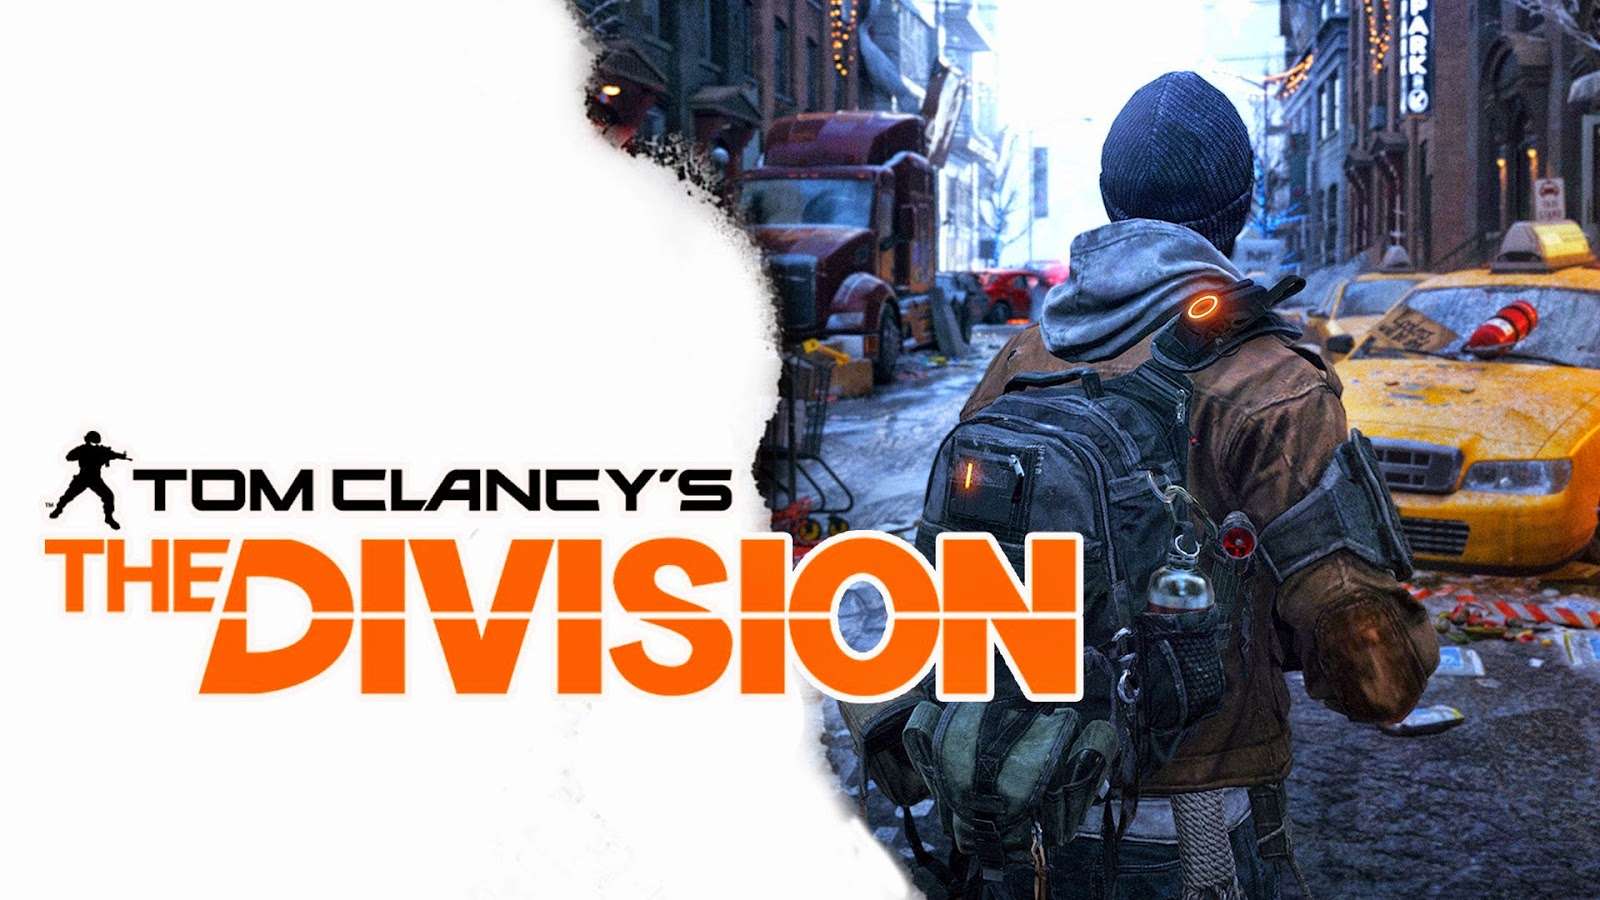 Tom Clancy's The Division CD Key 2016